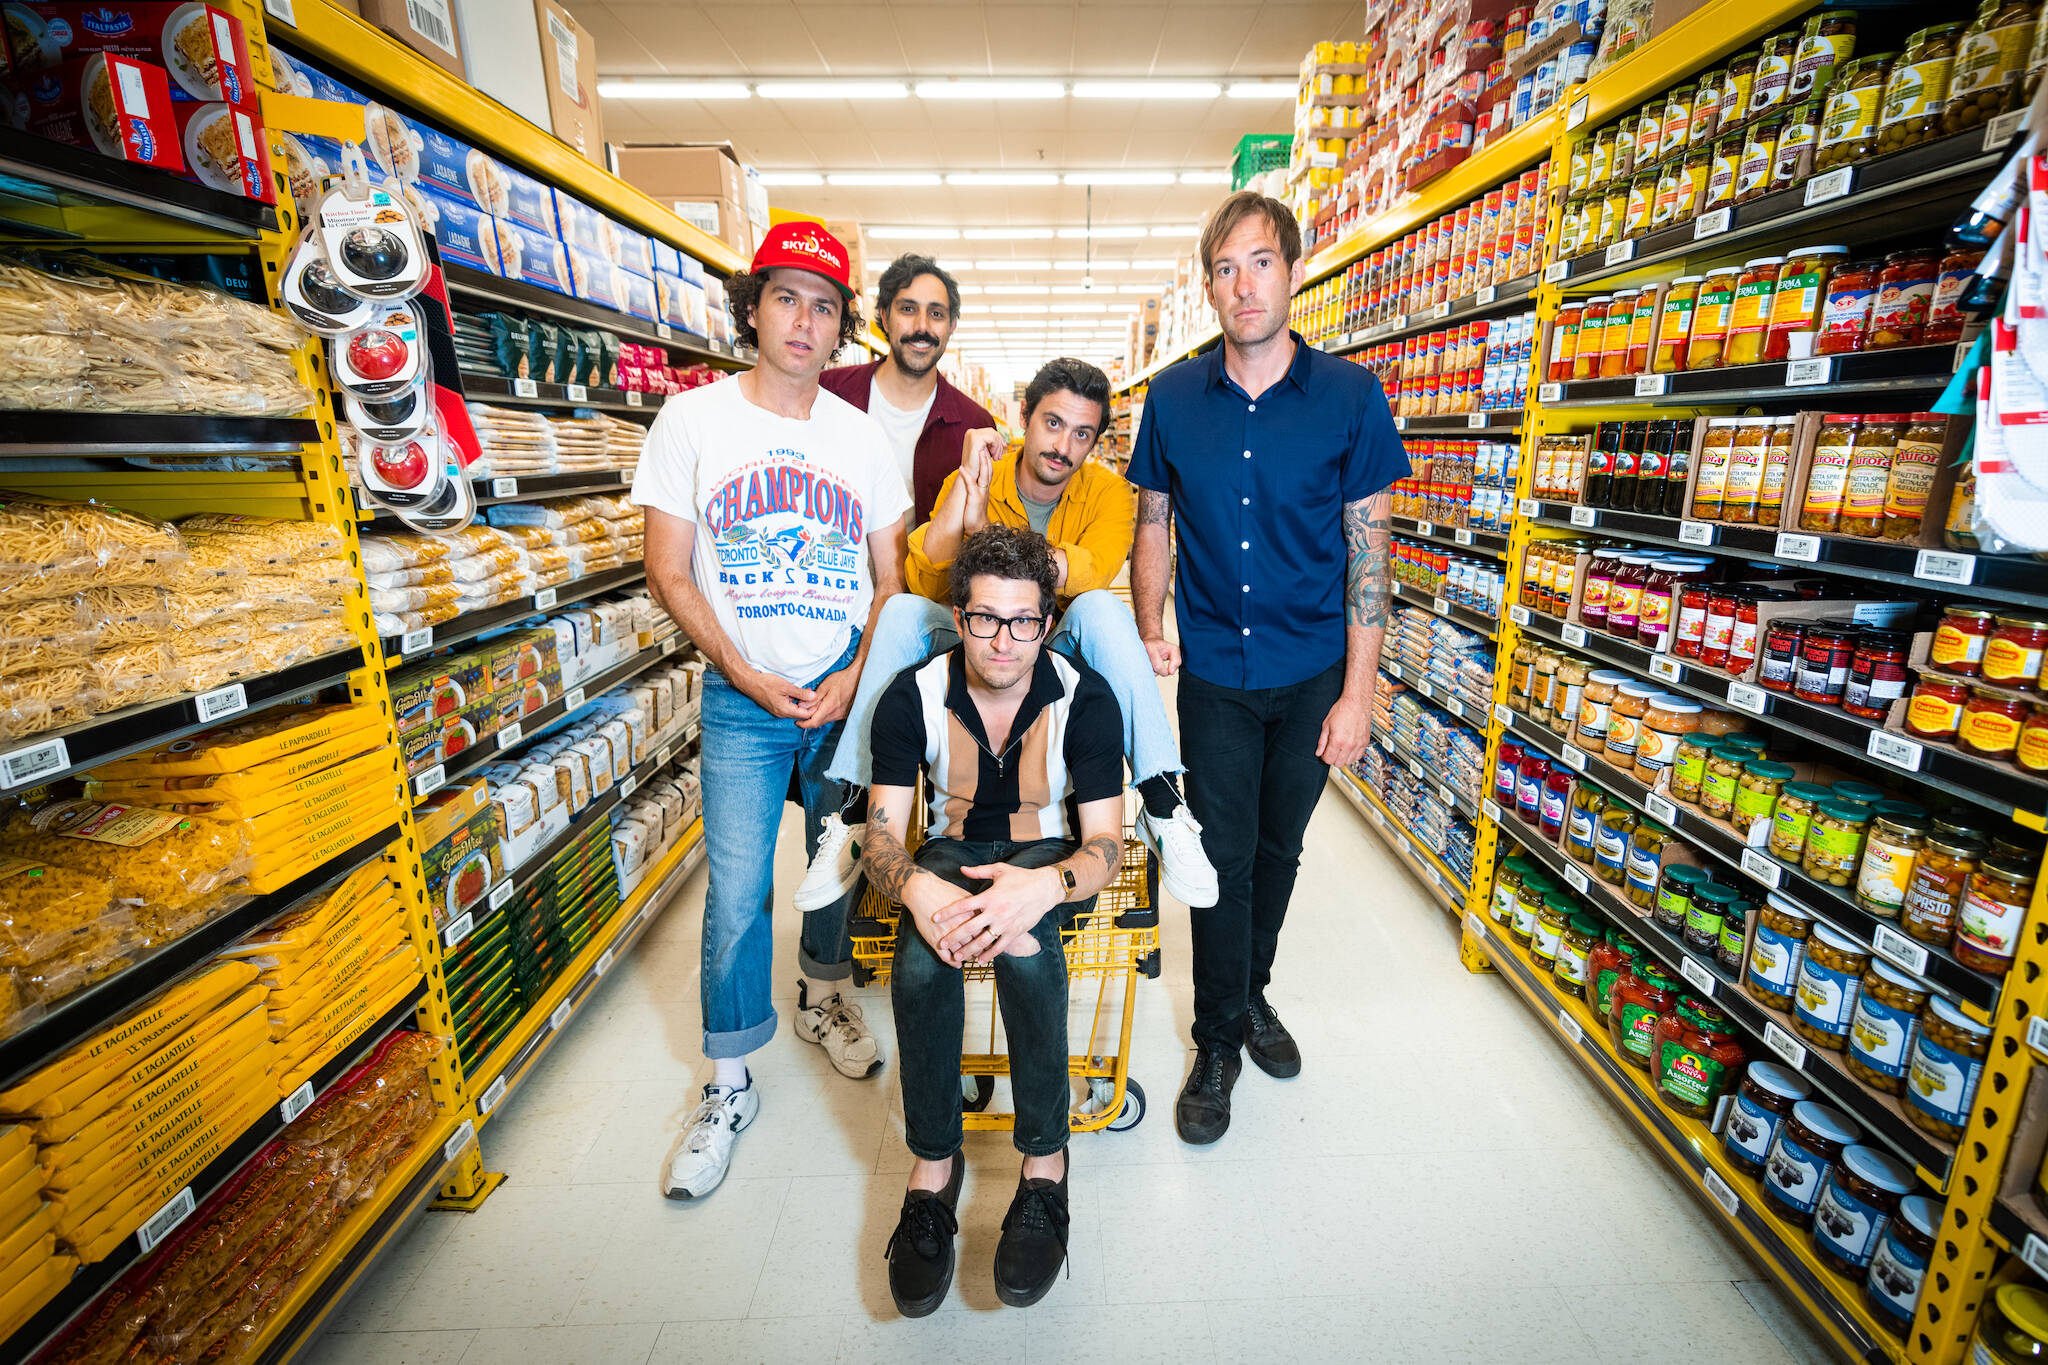 No Frills at Dufferin Mall is now the star of a new music video